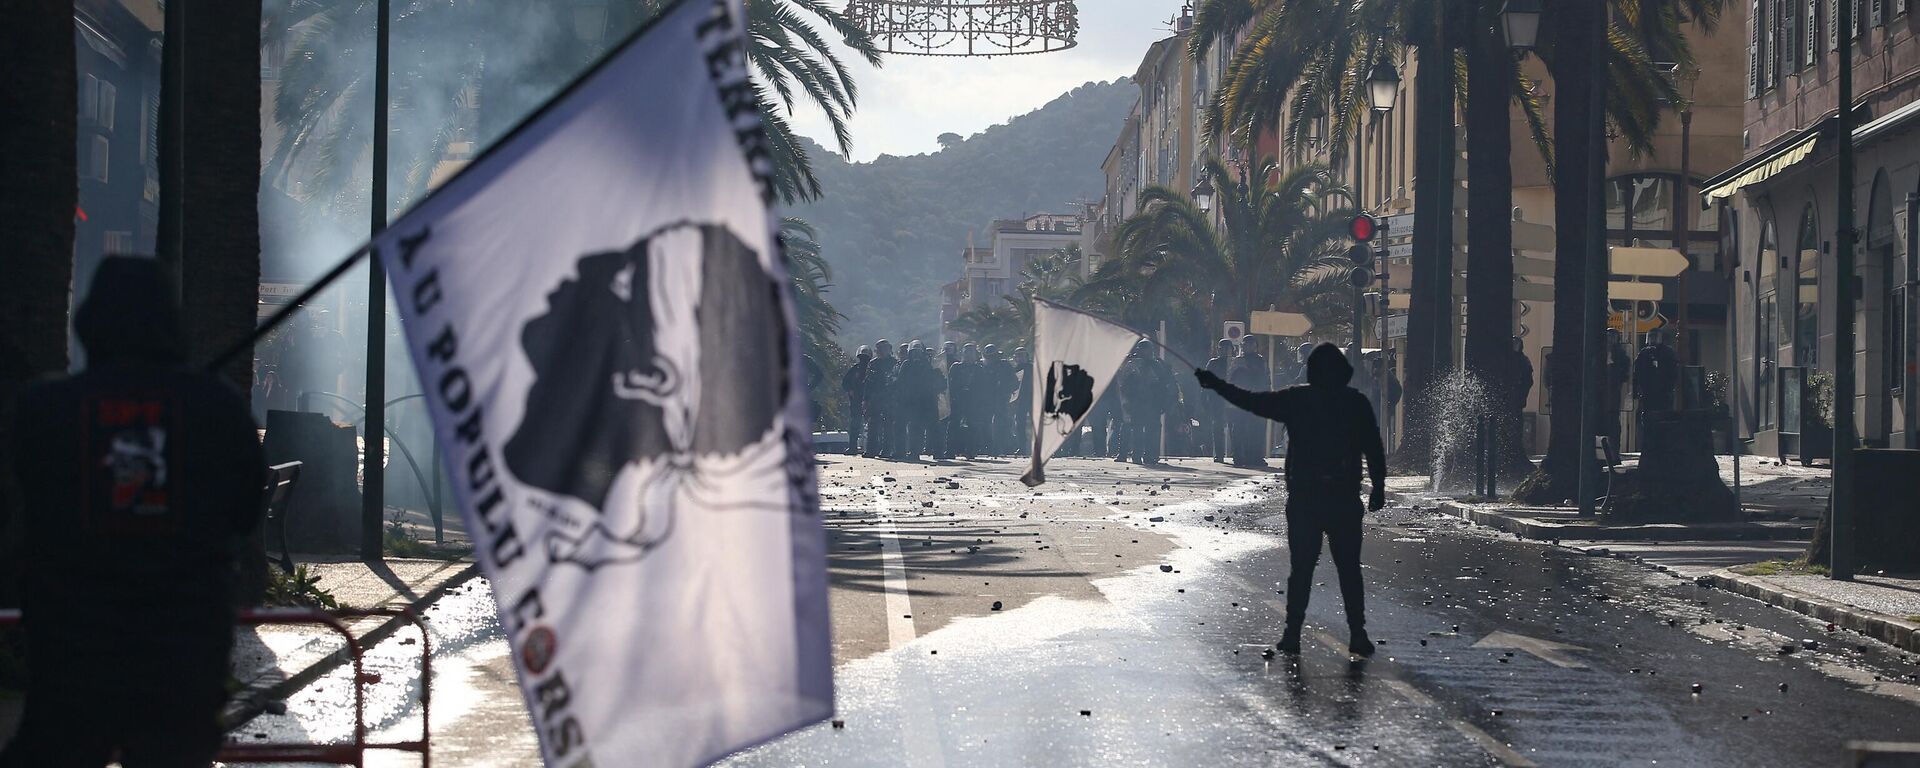 Protesters hold flags of Corsica as they face CRS riot police in Ajaccio on April 3, 2022. - Sputnik International, 1920, 11.03.2023